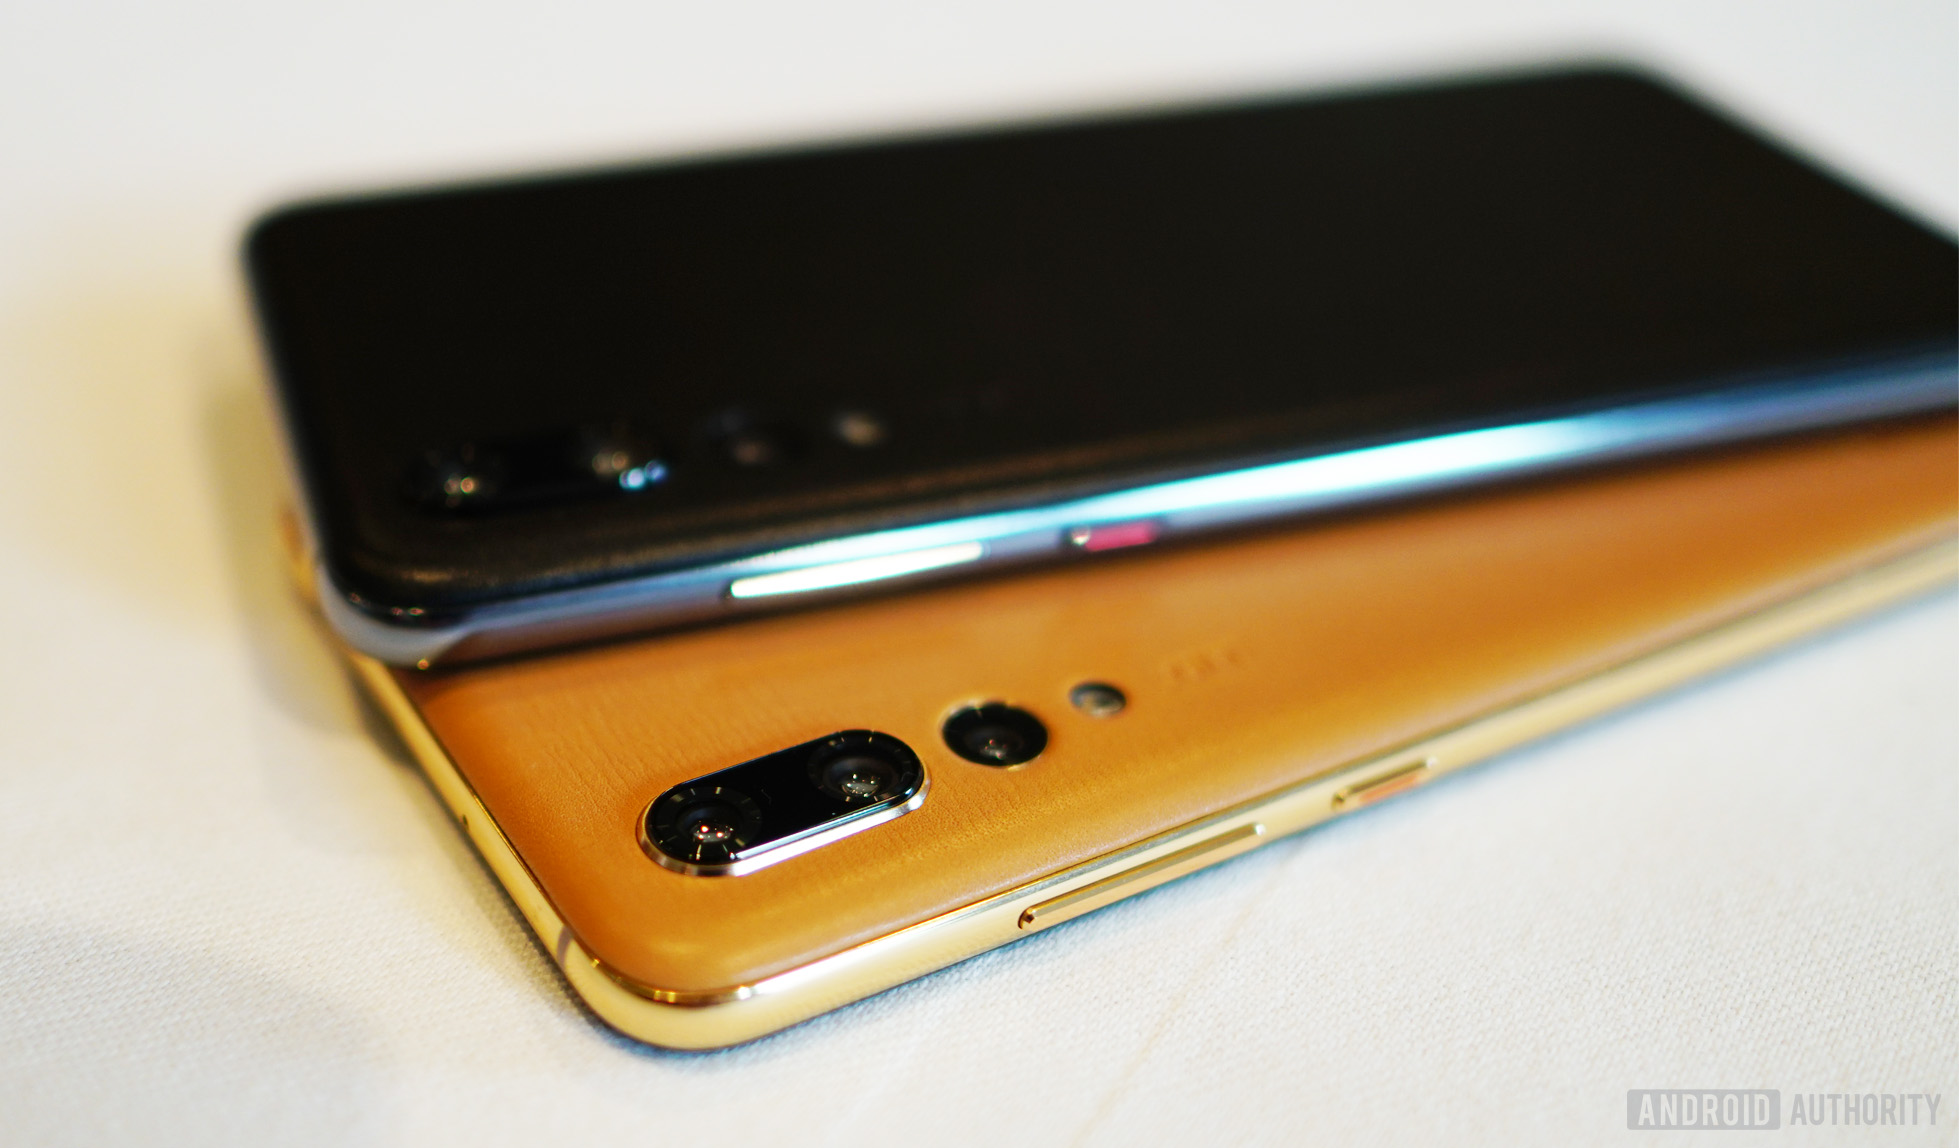 The leather-clad HUAWEI P20 Pro models.